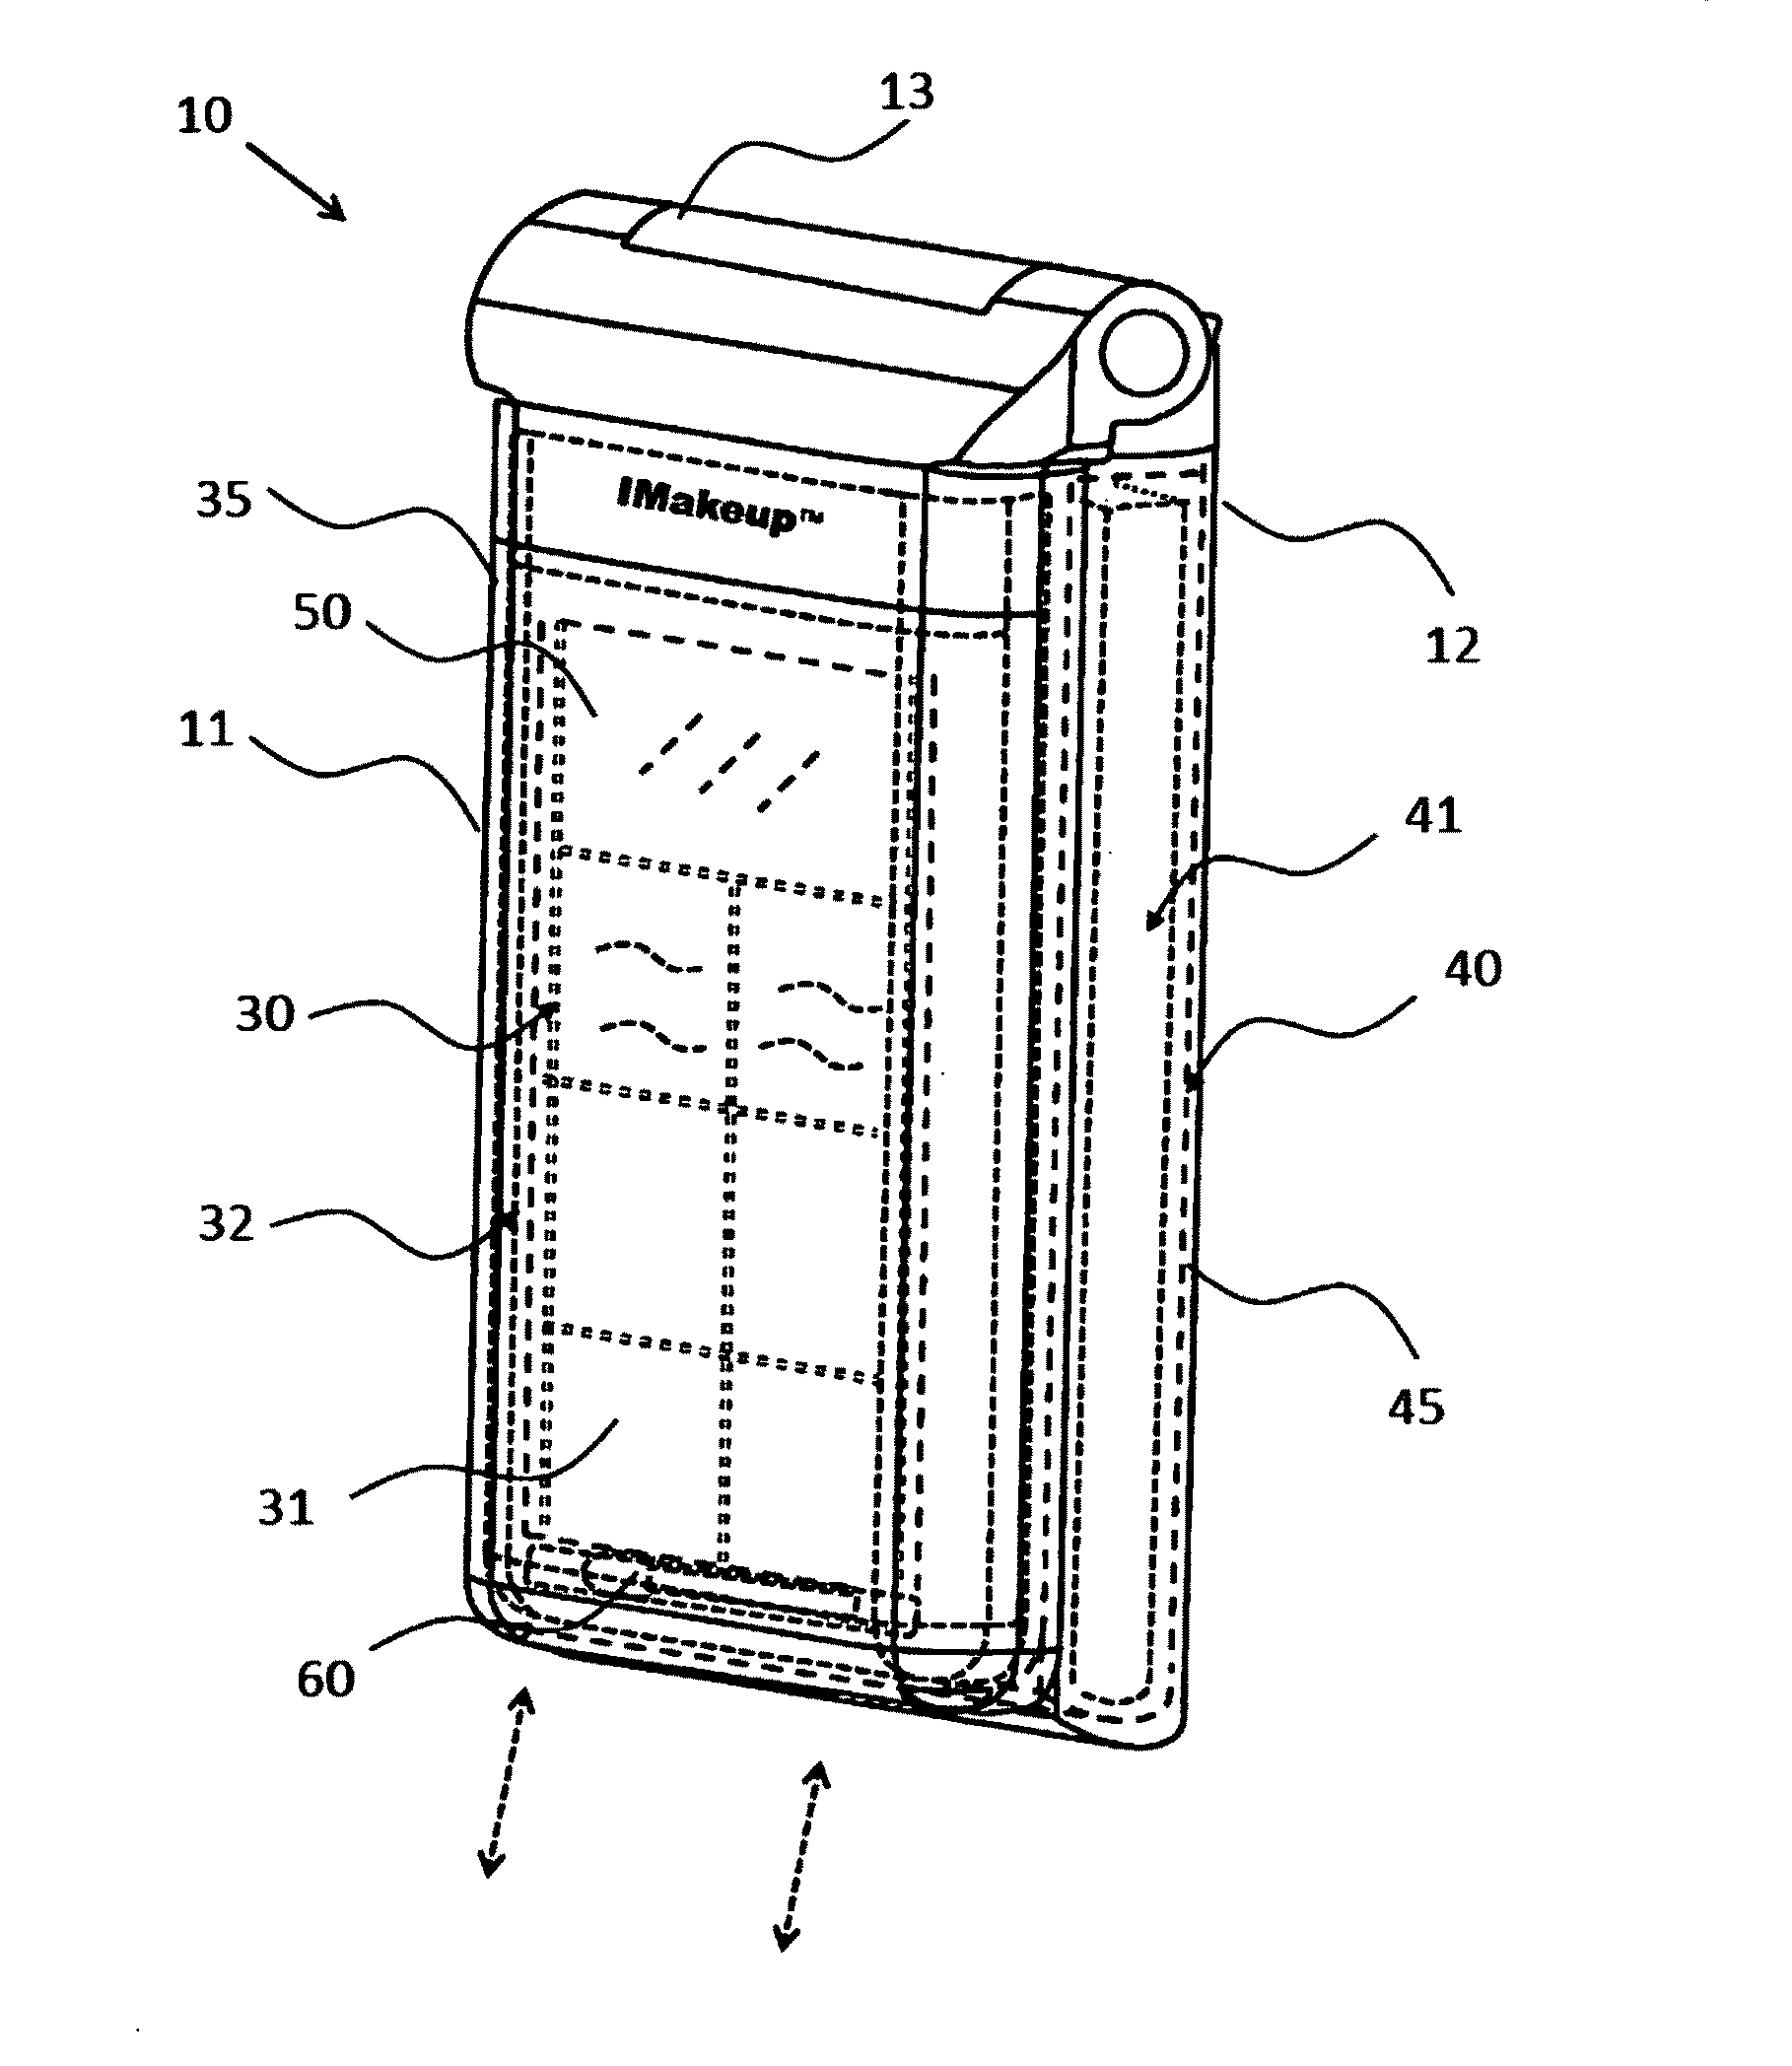 Compartmentalized protective case for portable handheld electronic devices